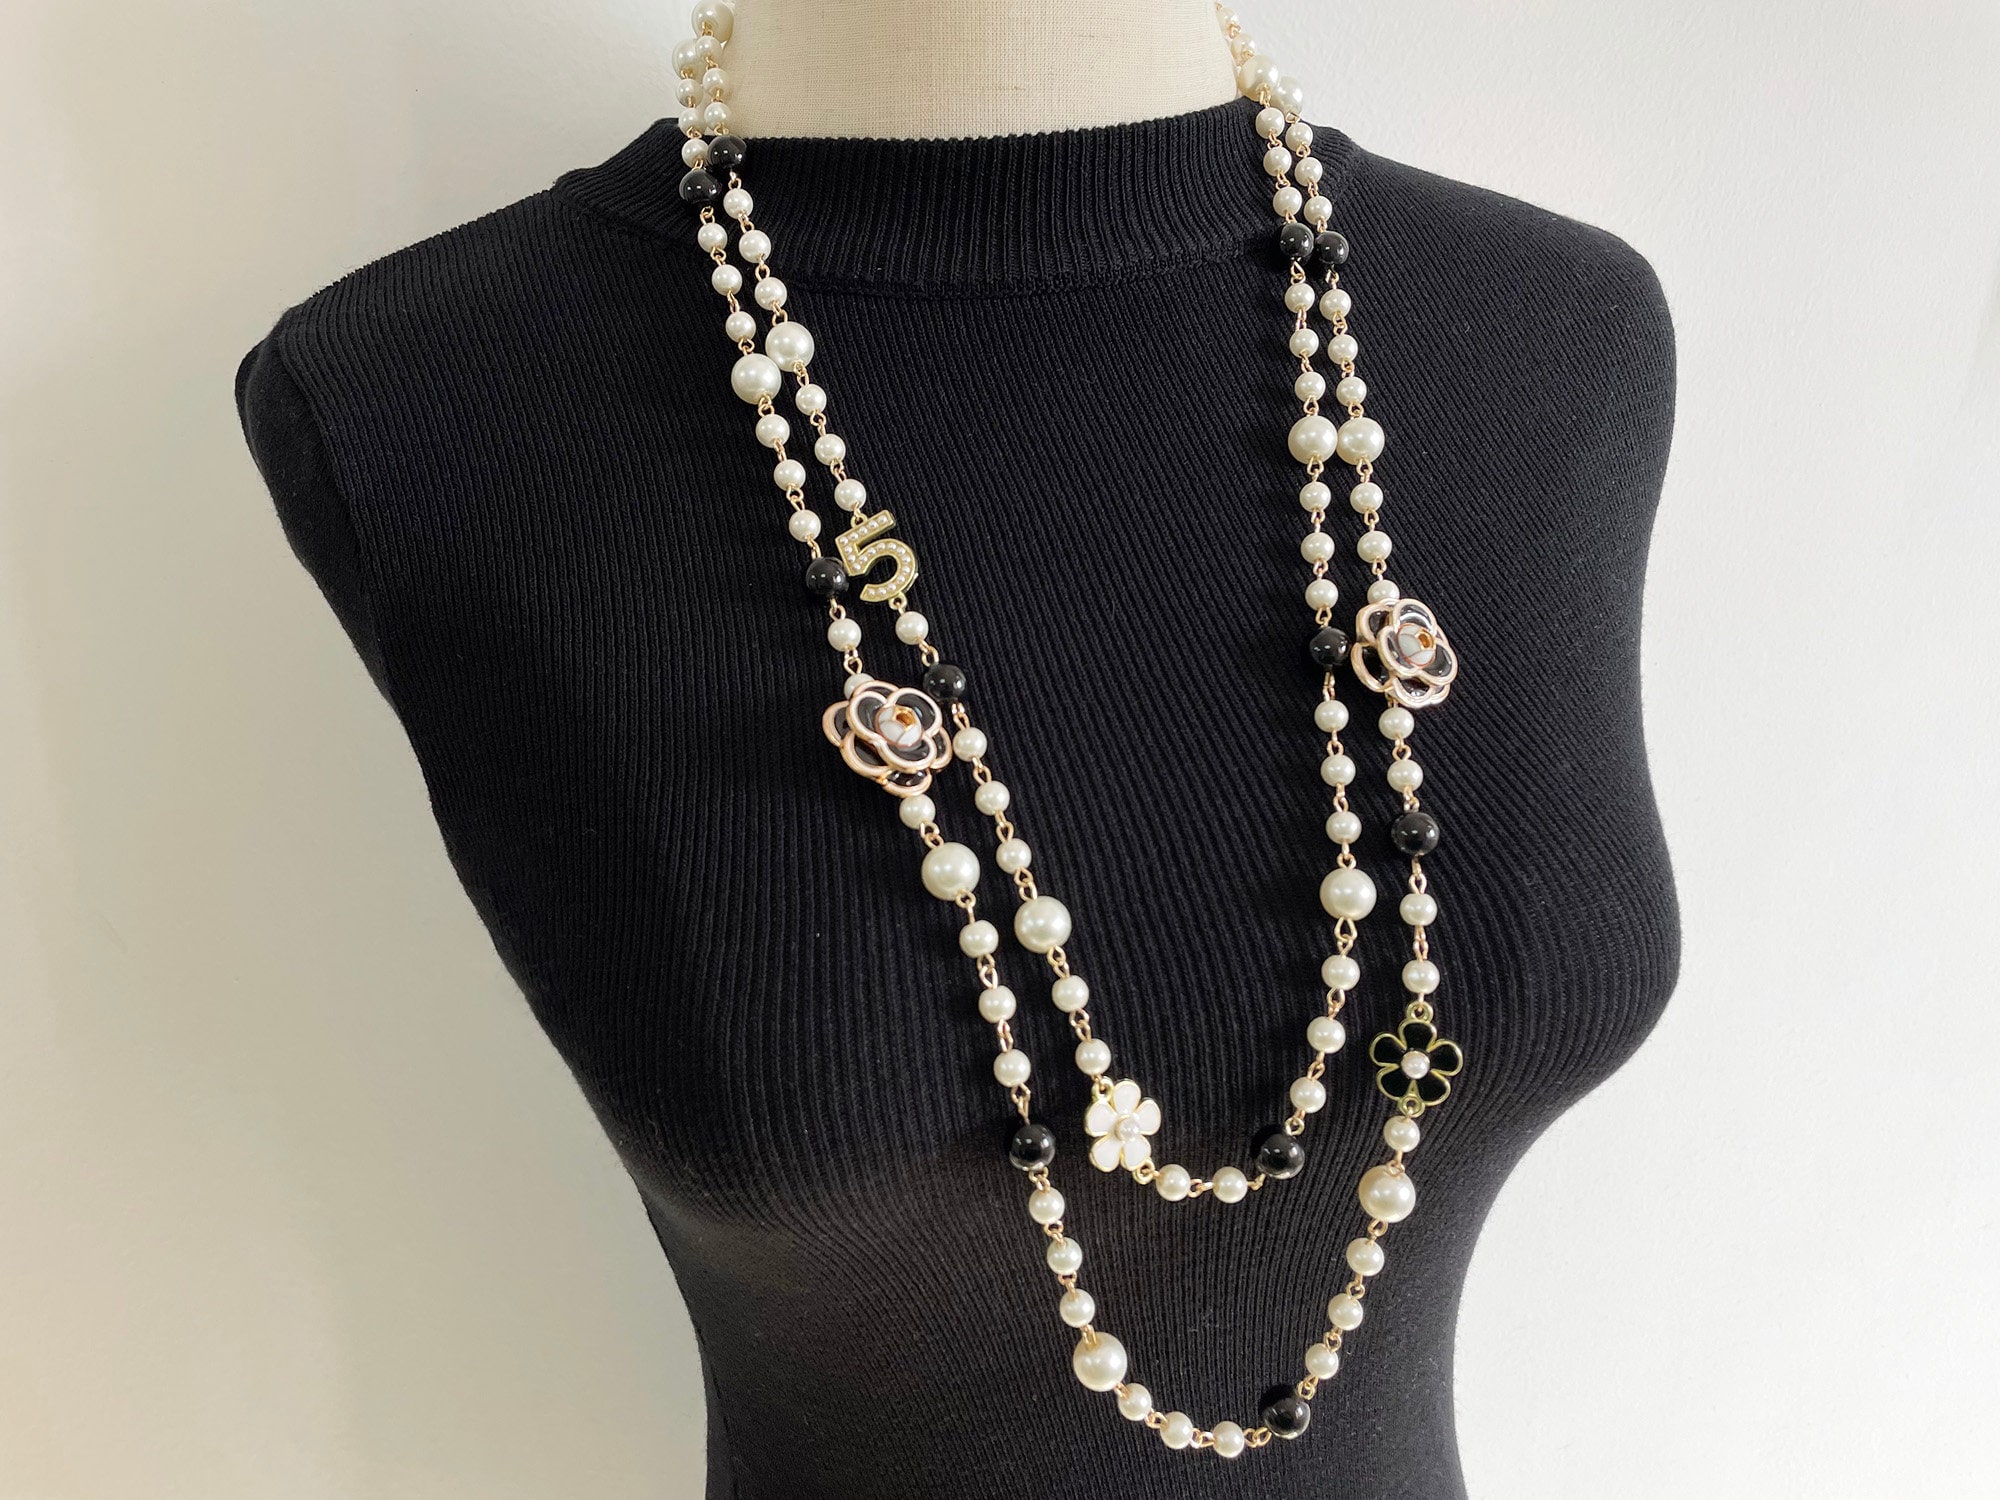 pearl statement necklace layered pearl necklace pearls with rhinestone  jewels black and white tweed jacket chanel inspired outfit  Meagans Moda